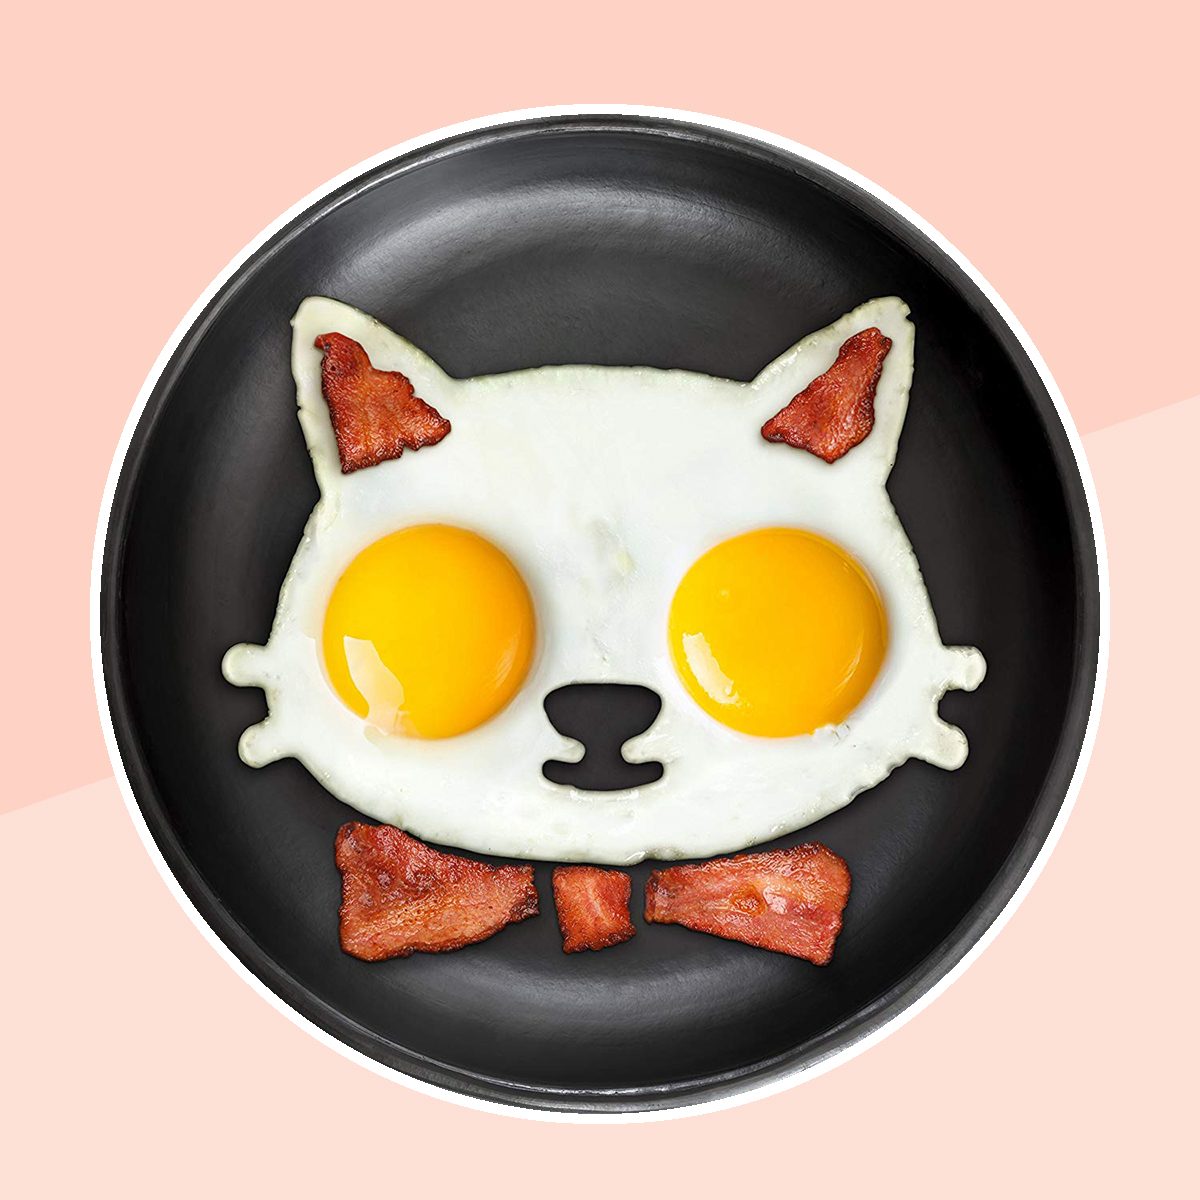 https://www.tasteofhome.com/wp-content/uploads/2018/10/Fred-FUNNY-SIDE-UP-Silicone-Egg-Mold-Cat-.jpg?fit=696%2C696